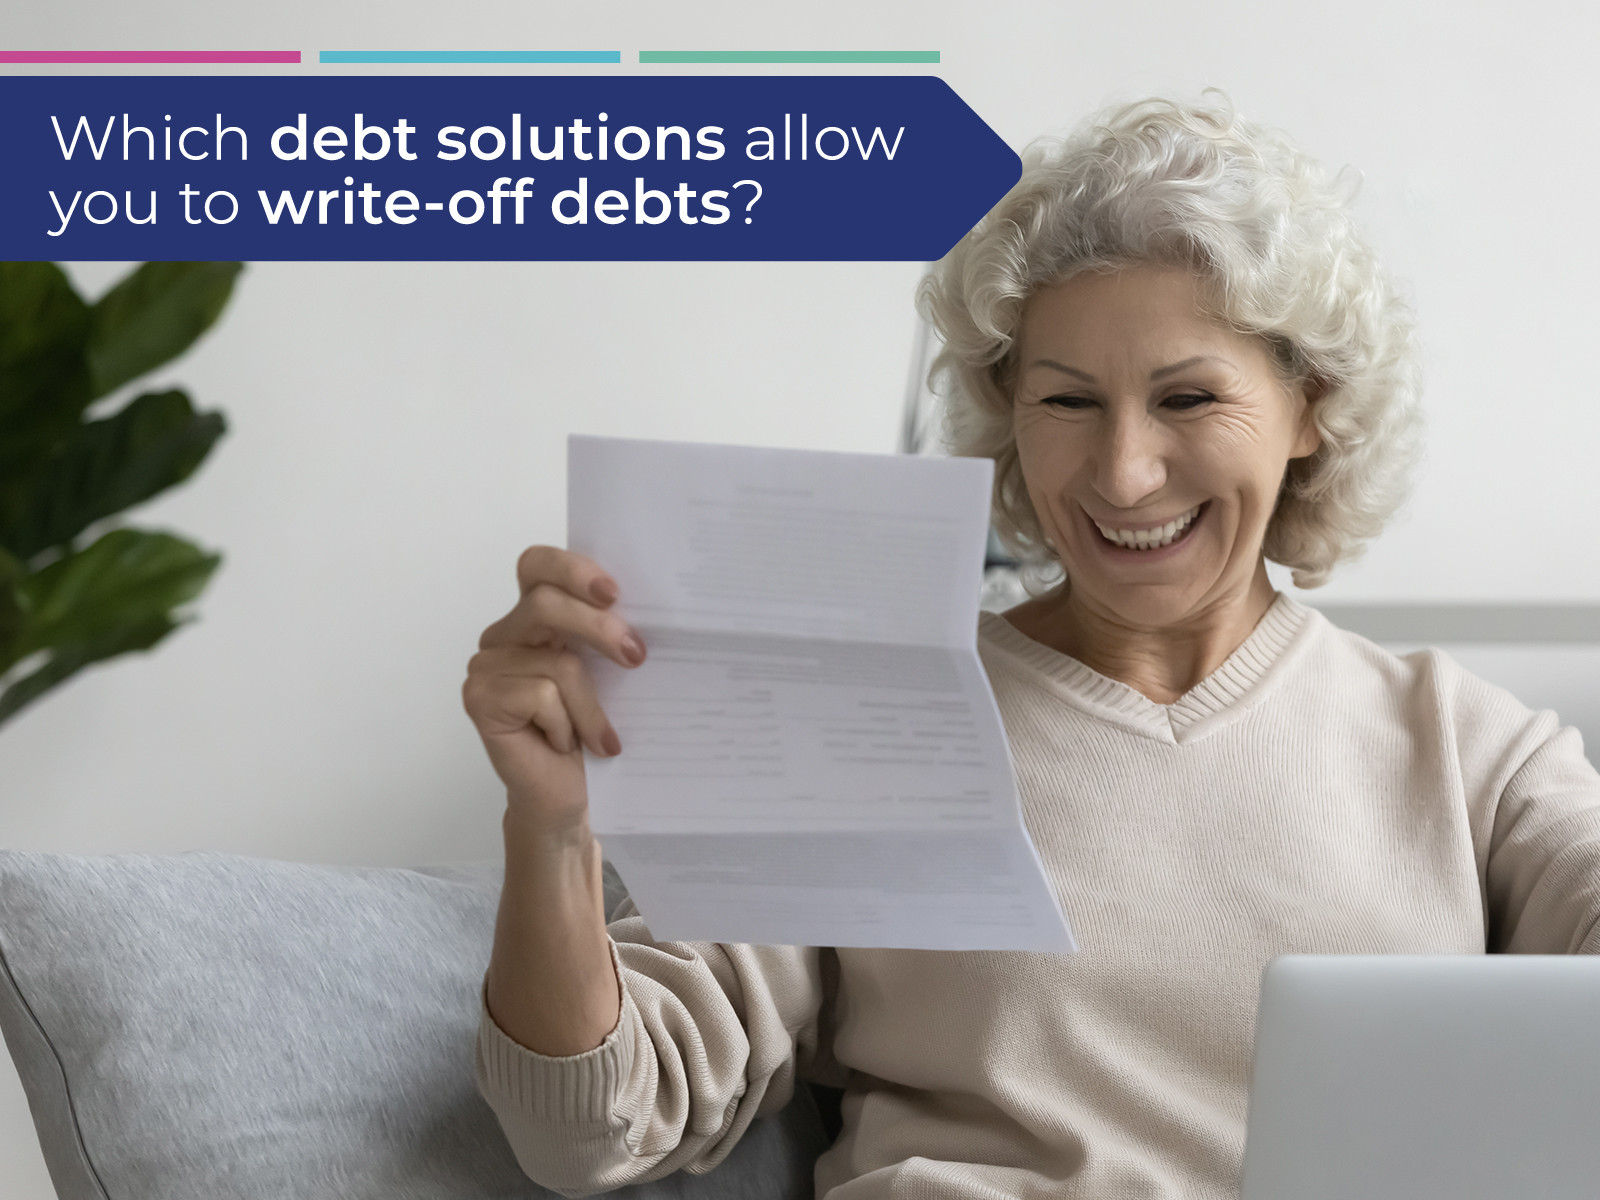 Which debt solutions allow you to write-off debts